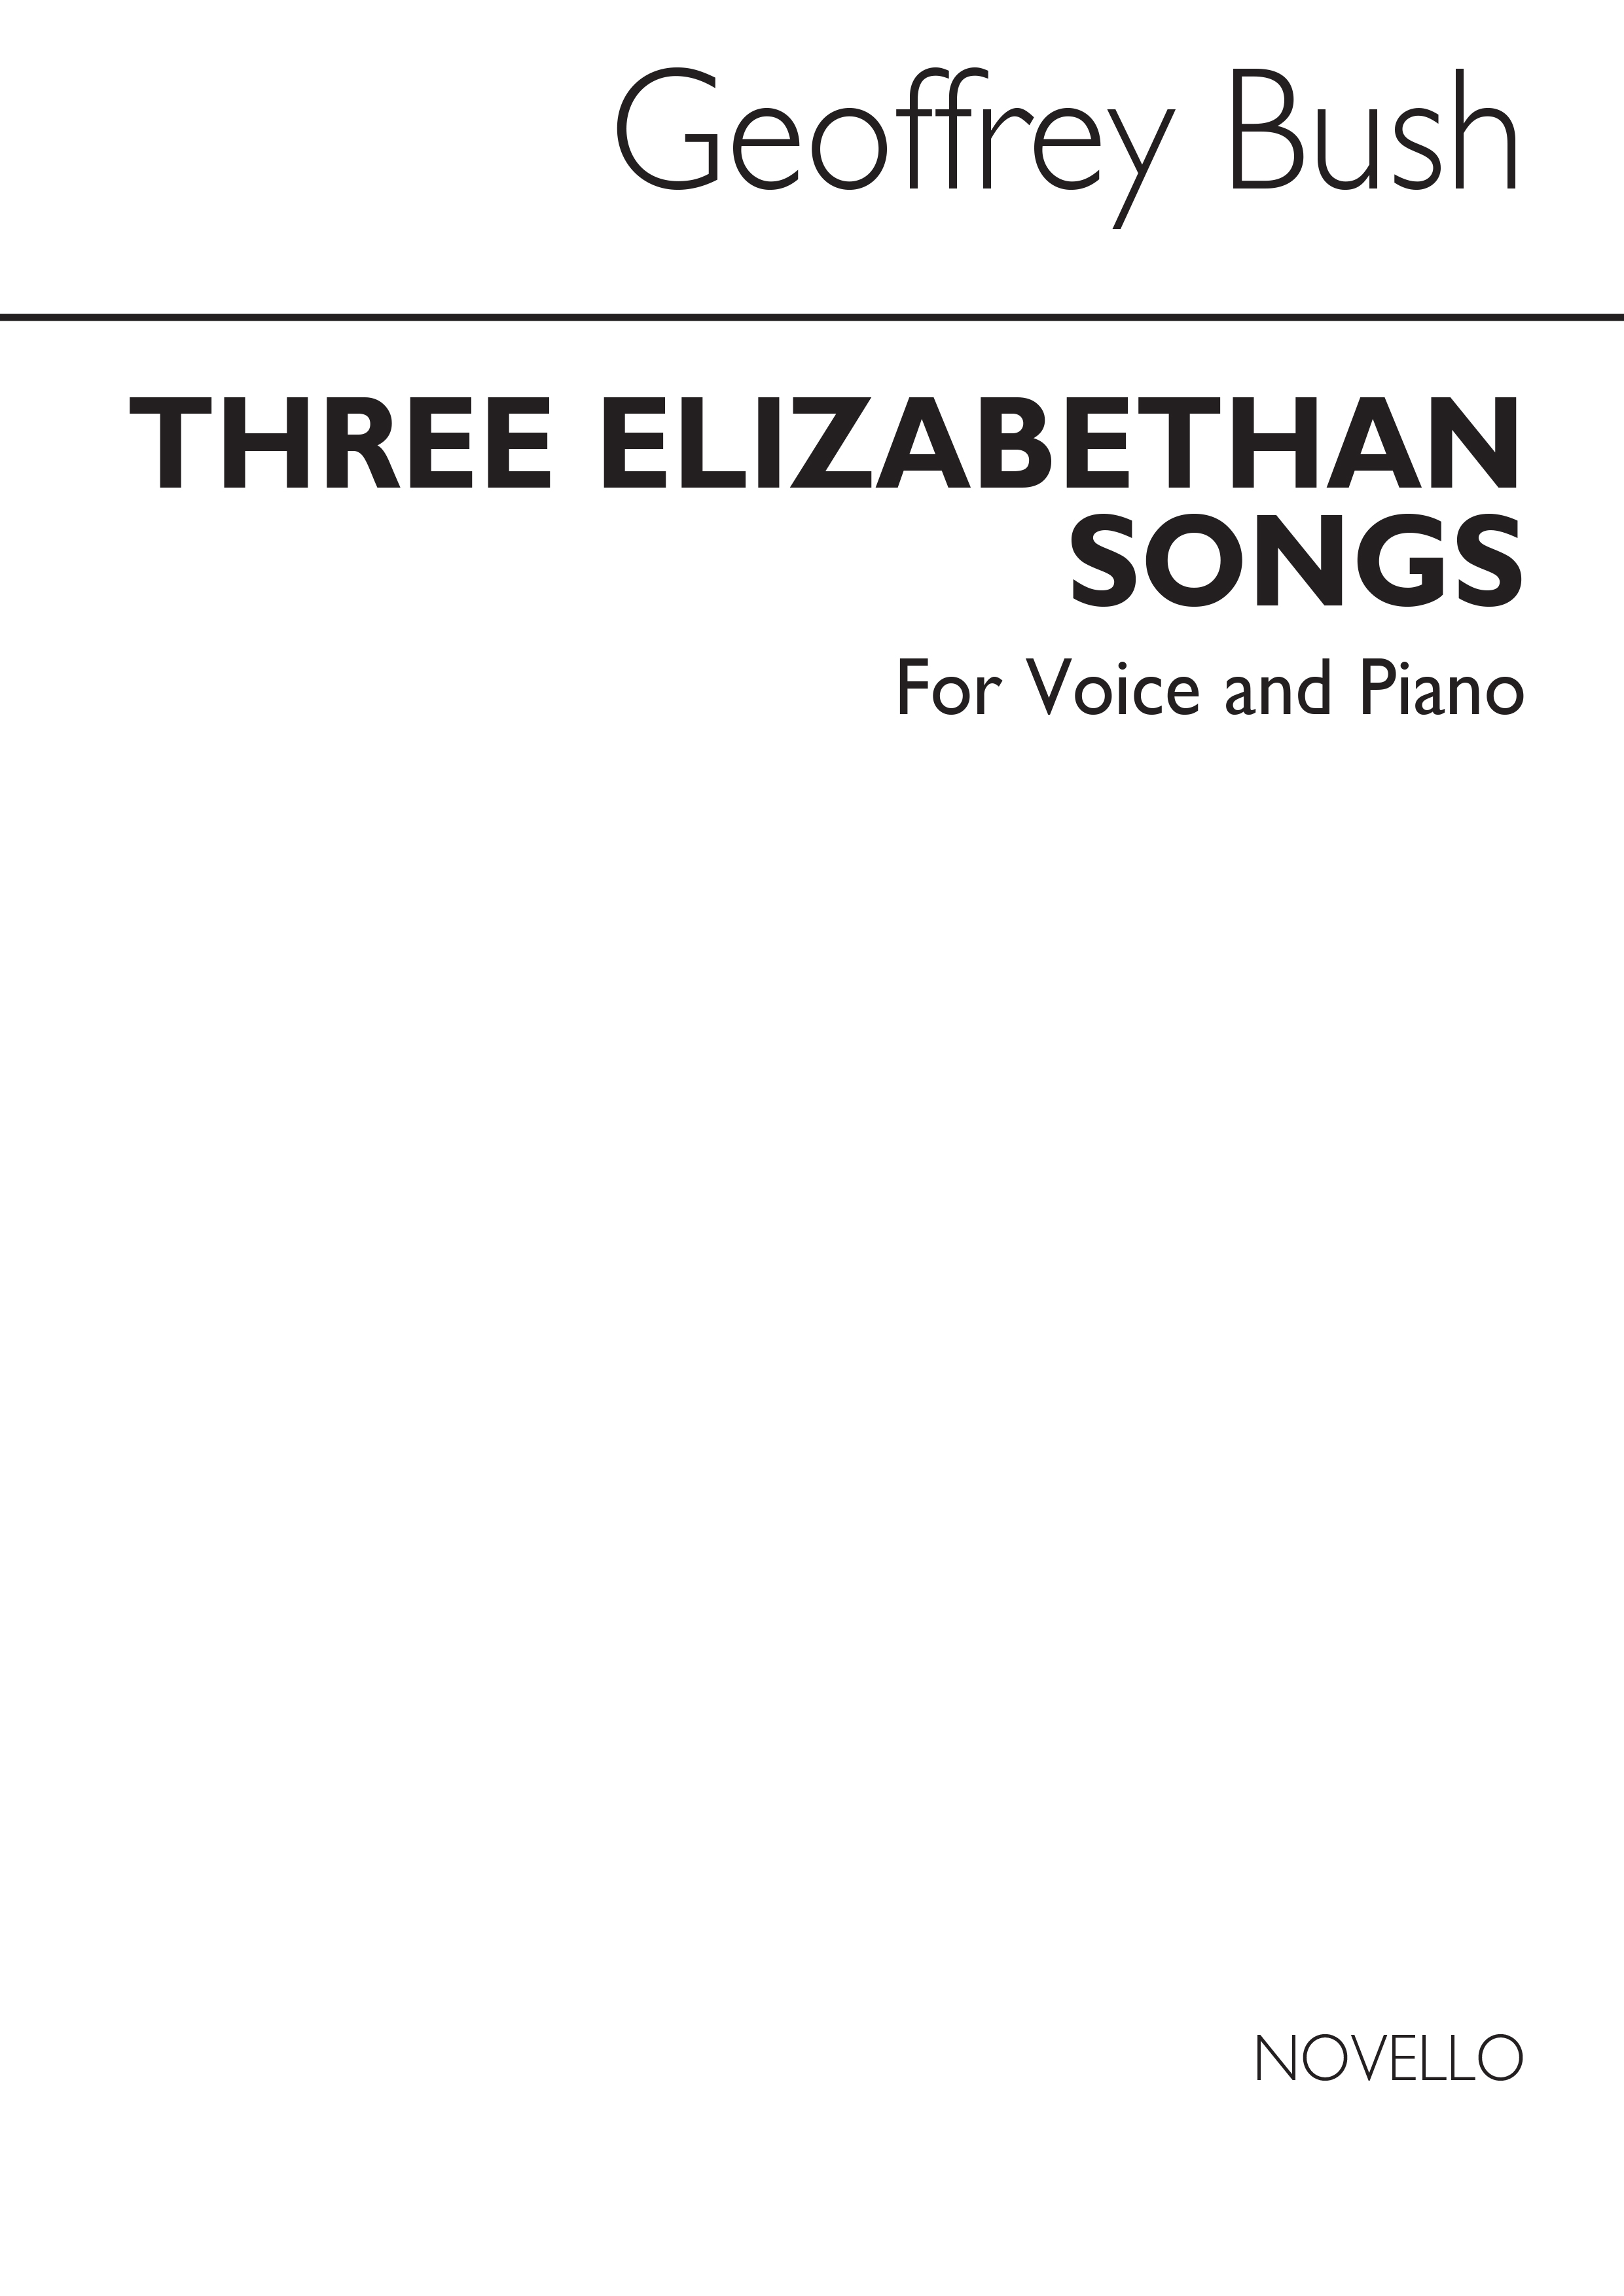 Geoffrey Bush: Three Elizabethan Songs for Voice and Piano